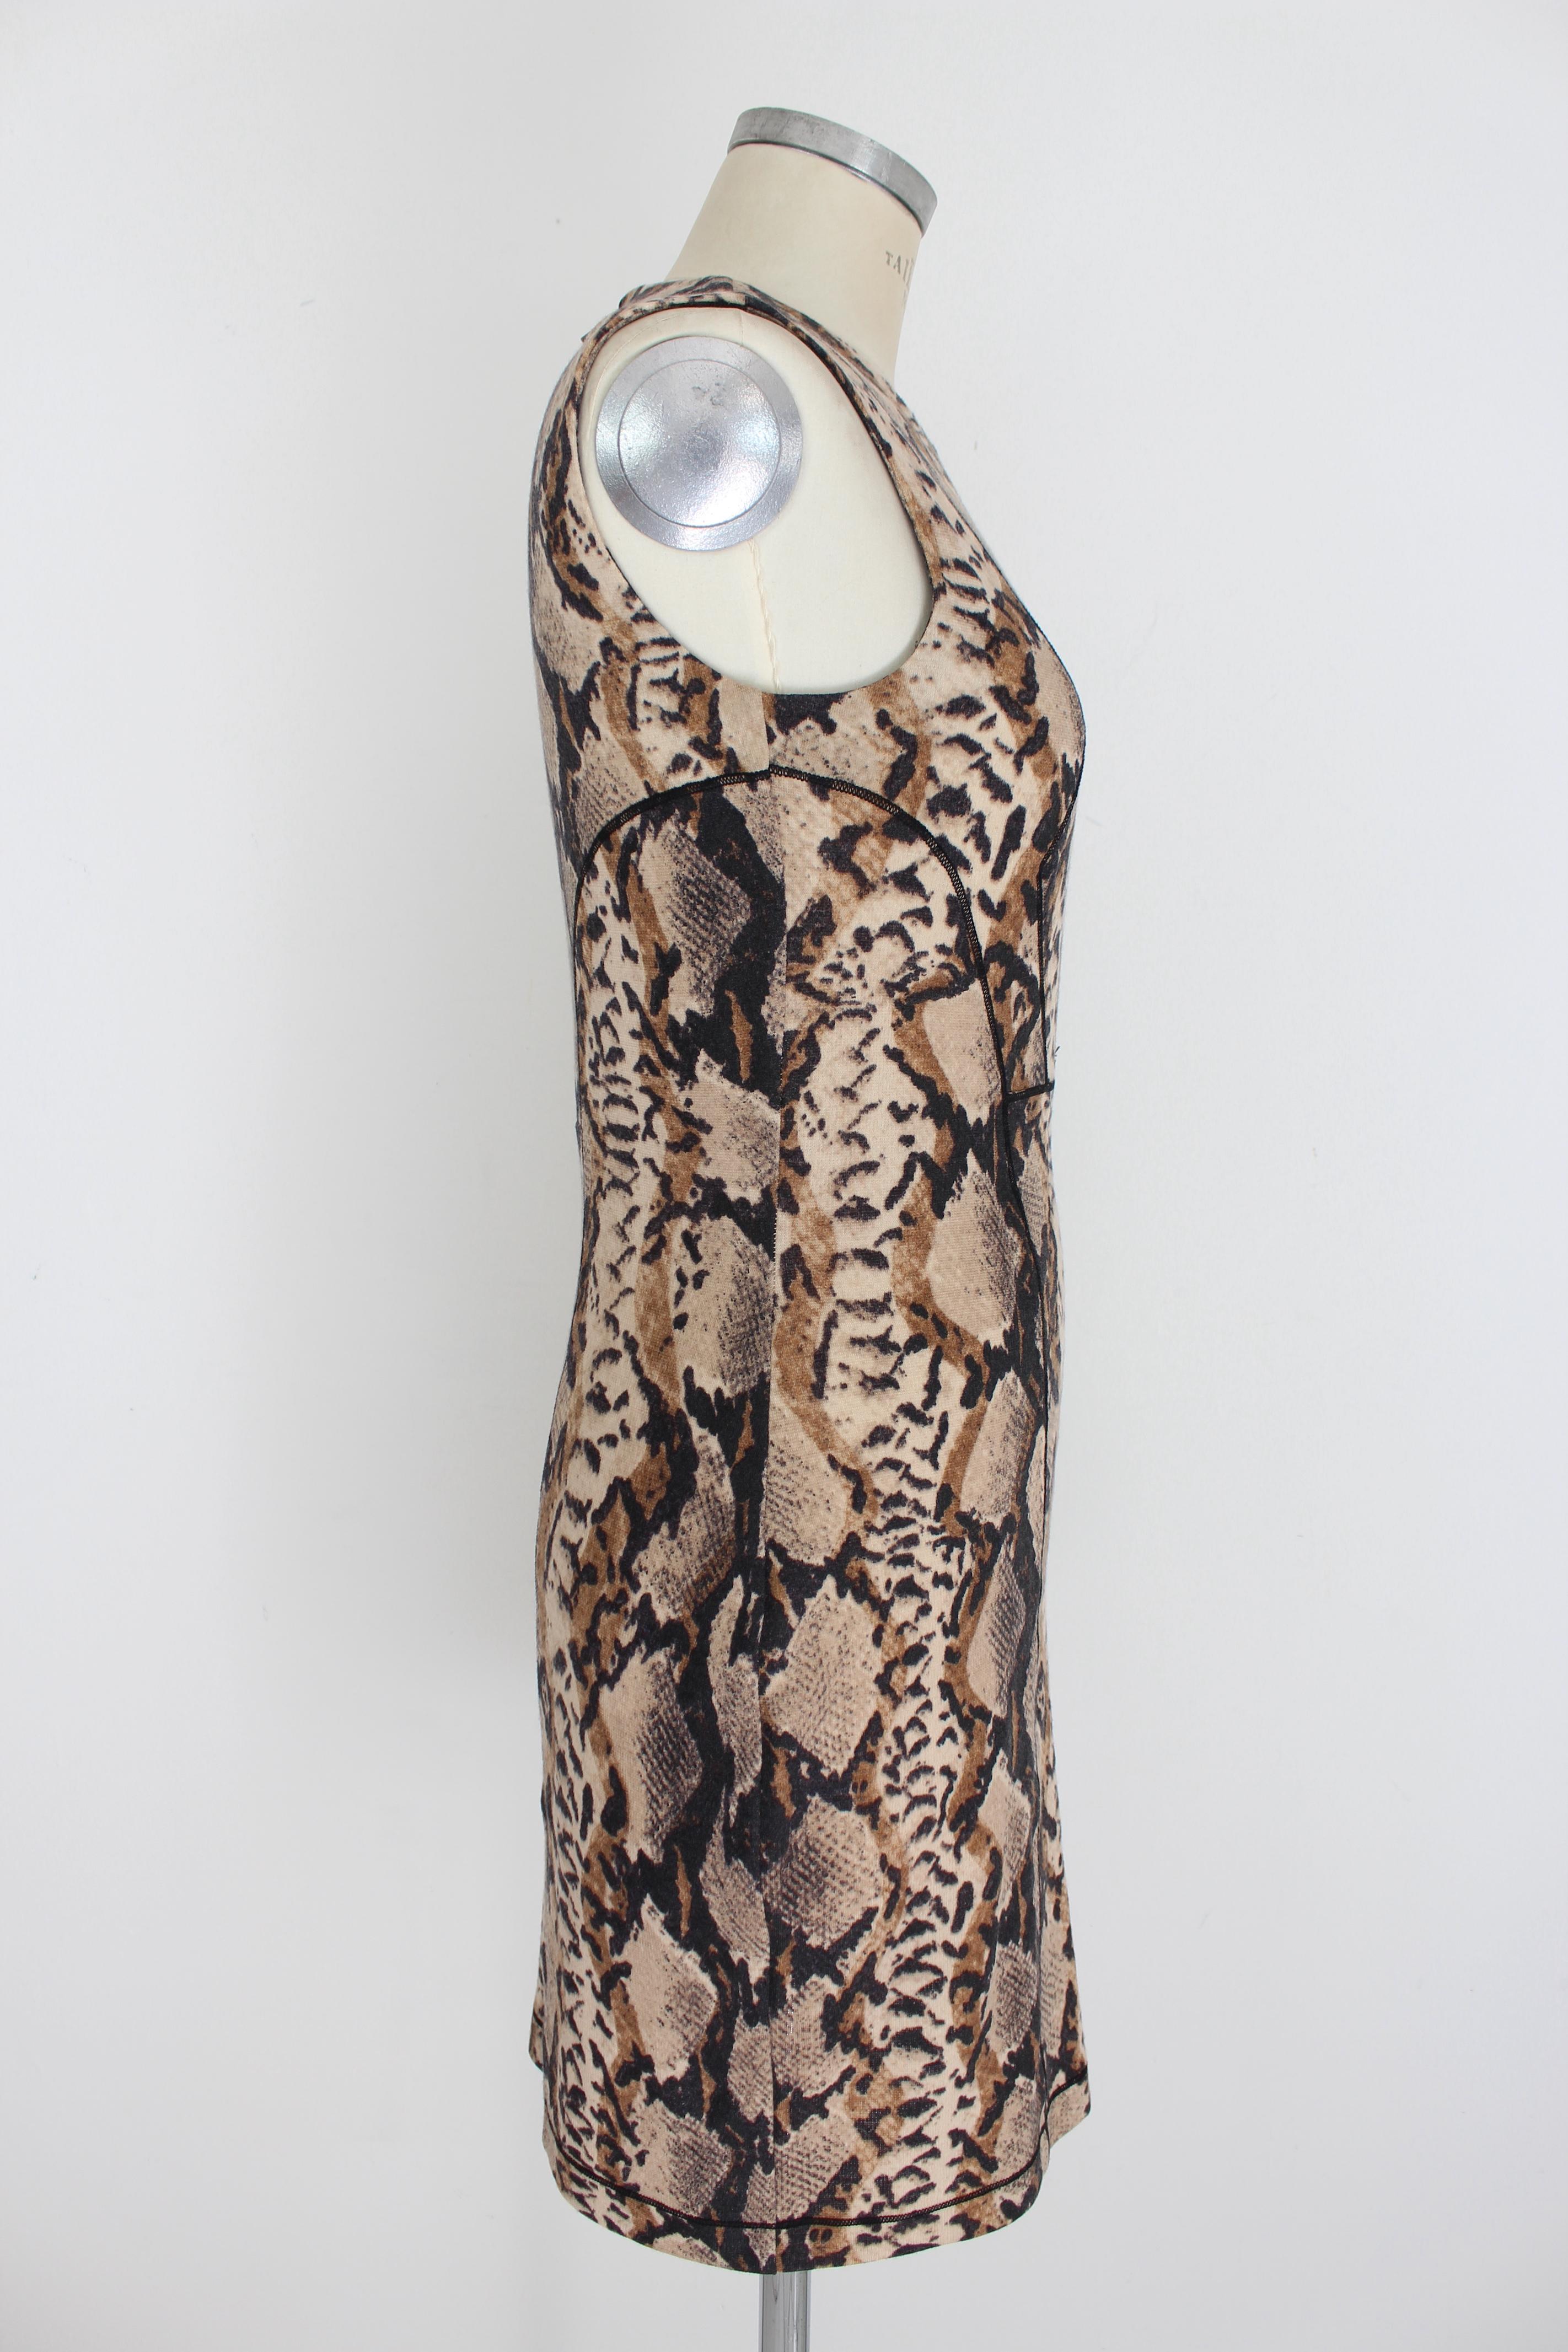 Blumarine 2000s women's dress. Sheath dress with animalier pattern, brown and beige. Zipper closure along the back and side. Fabric 88% wool, 12% polyamide. Made in Italy.

Condition: Excellent

Item used few times, it remains in its excellent